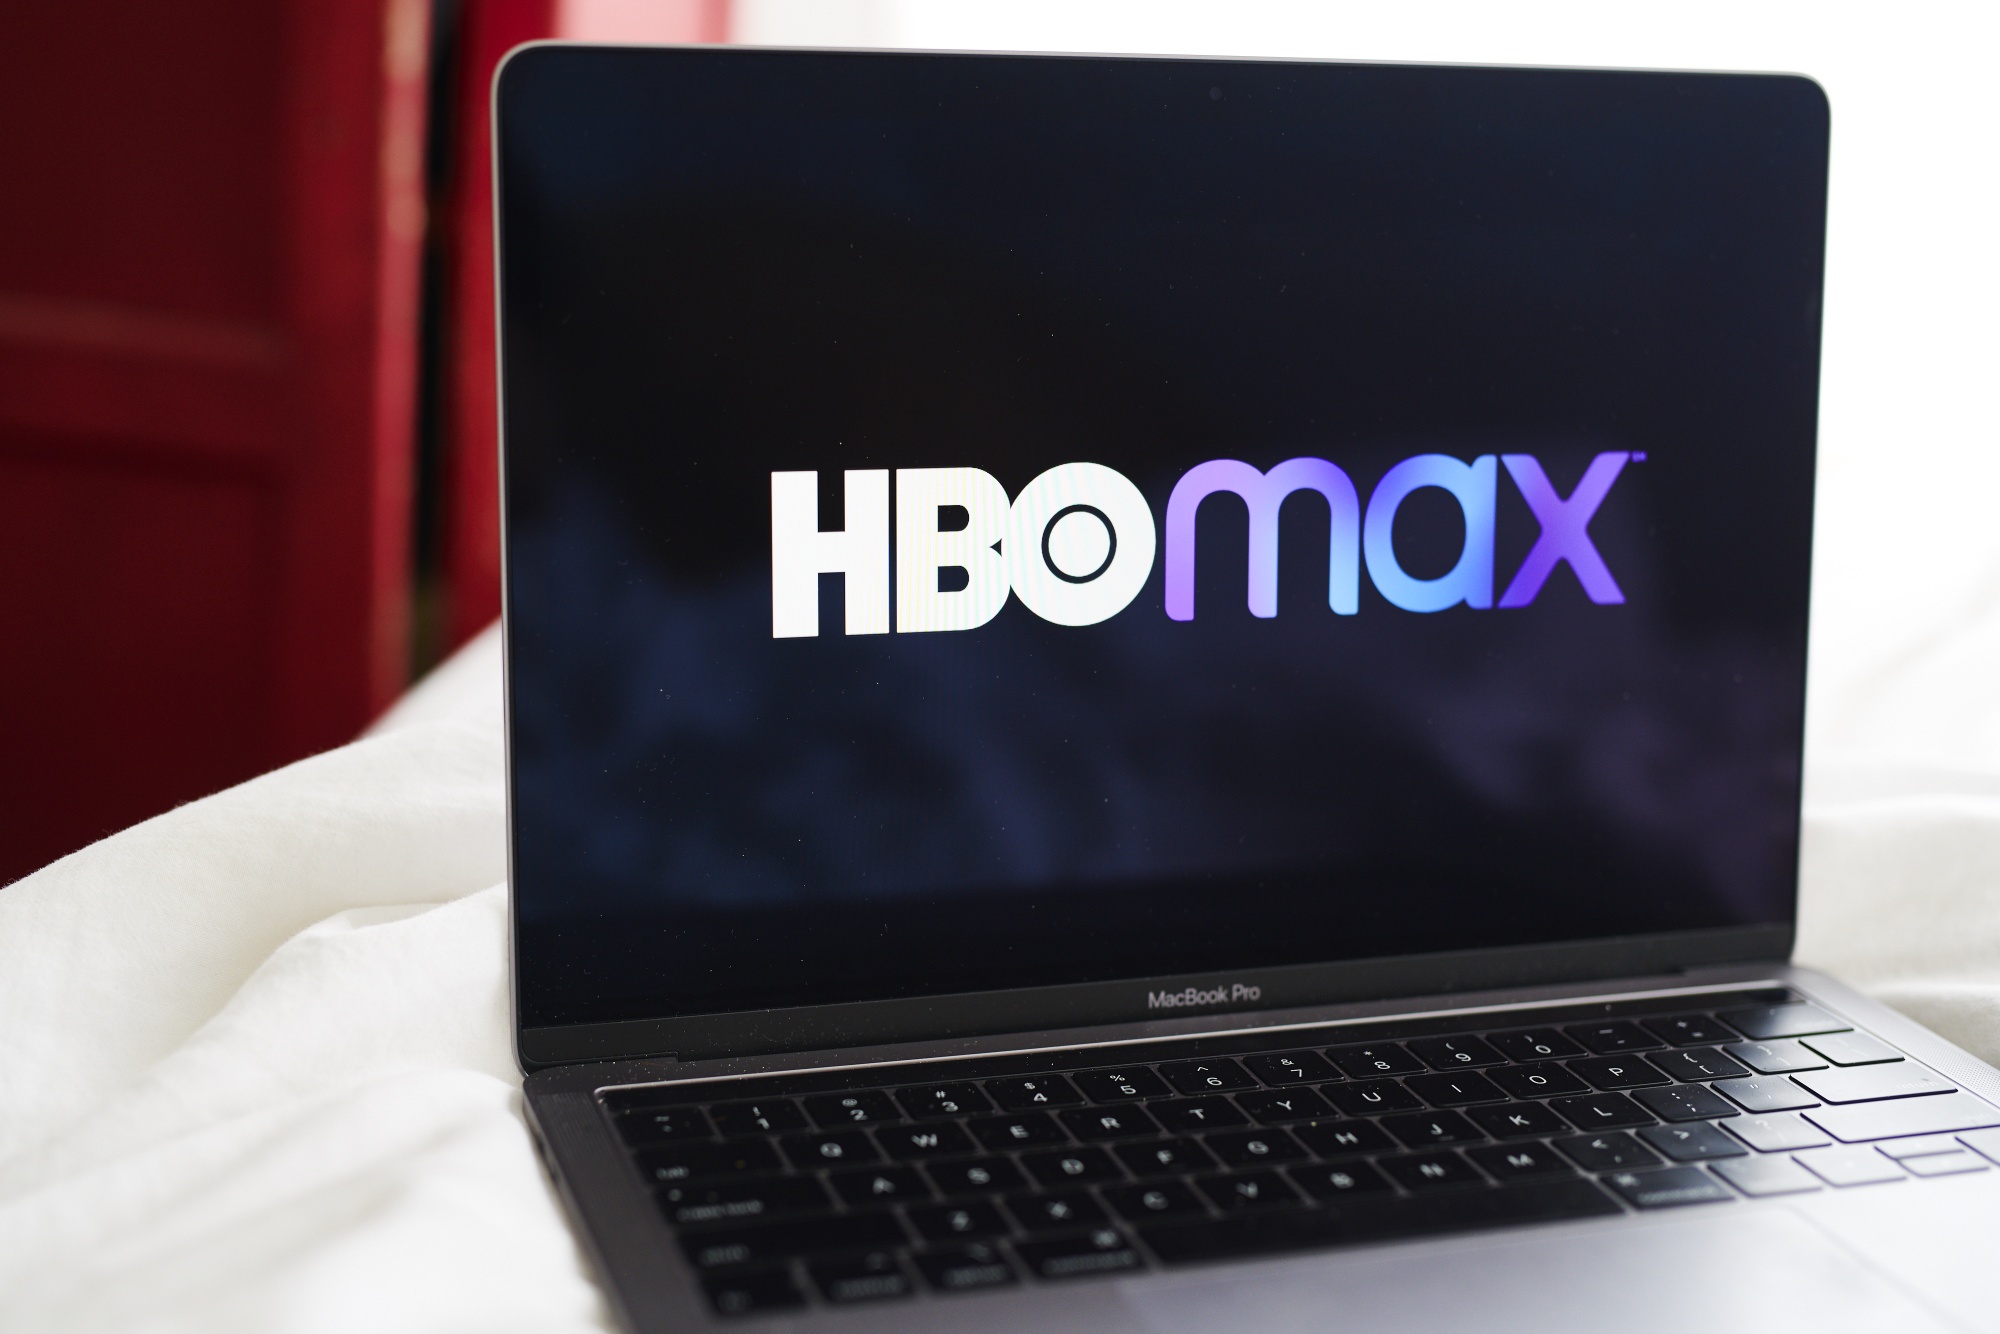 EXCLUSIVE HBO Max to launch in 15 European countries on March 8